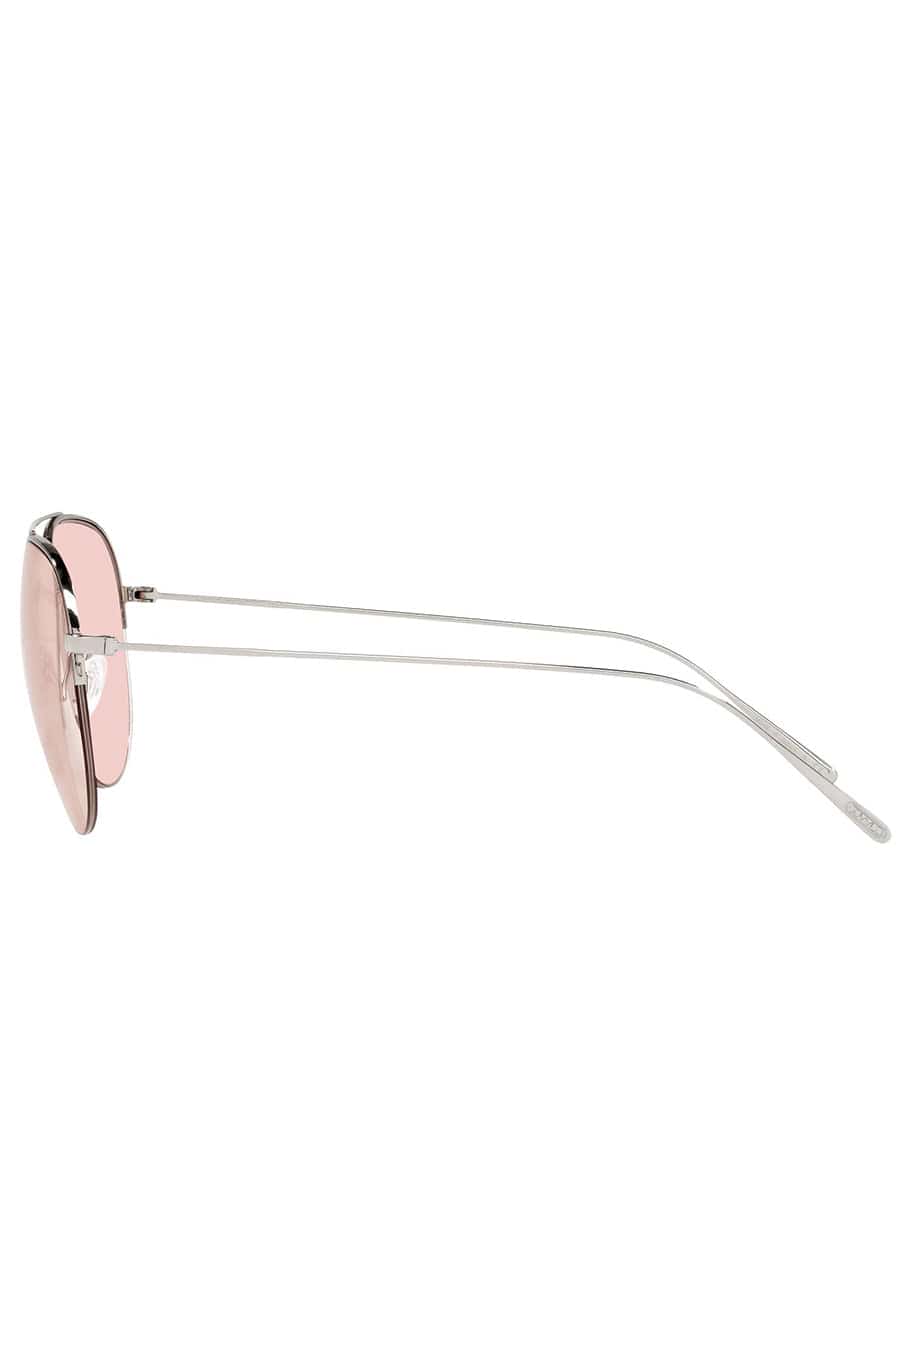 OLIVER PEOPLES-Cleamons Sunglasses - Silver Poppy-SILVER/POPPY